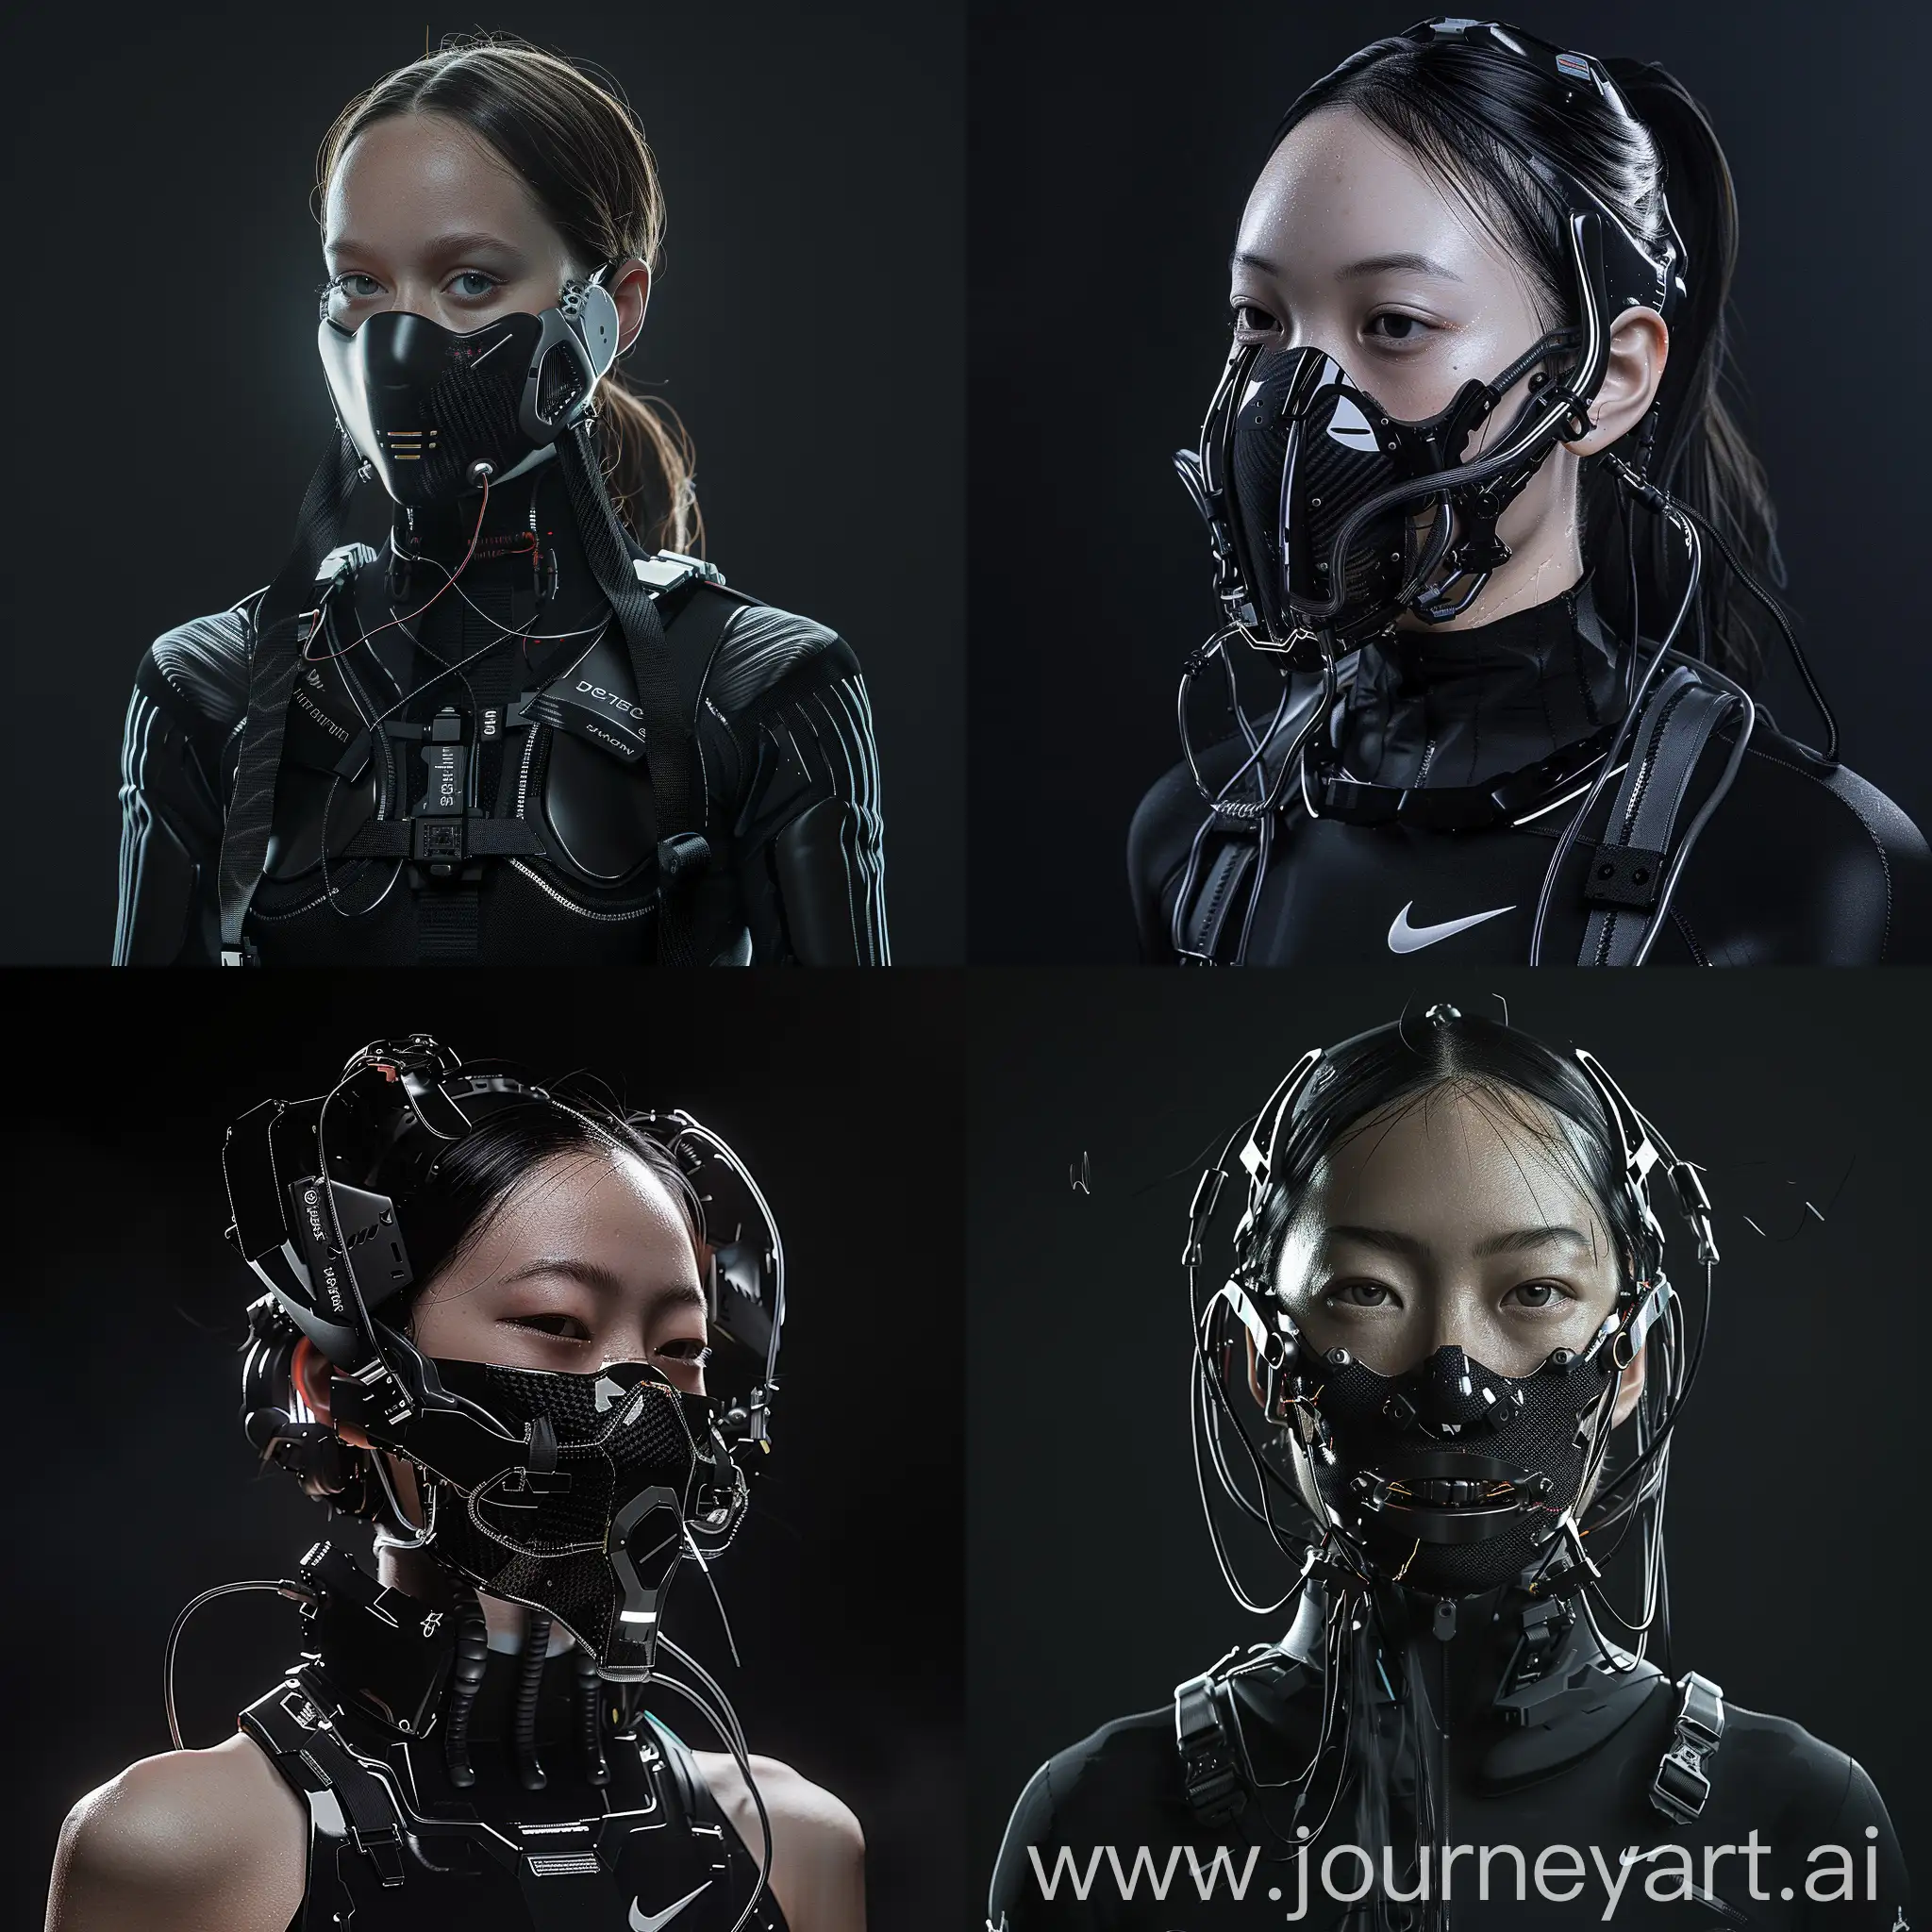 Against a sleek black backdrop, witness the captivating presence of a Beautiful characther adorned with a cybernetic mouth-covering mask. It seamlessly merges cutting-edge technology with intricate details, showcasing carbon fiber textures, sleek aluminum accents, and pulsating wires. Symbolizing the delicate equilibrium between humanity and machine, her appearance embodies the essence of a futuristic cyberpunk aesthetic, further accentuated by Nike-inspired add-ons. With dynamic movements reminiscent of action-packed film sequences, accompanied by cinematic haze and an electric energy, she exudes an irresistible allure that commands attention